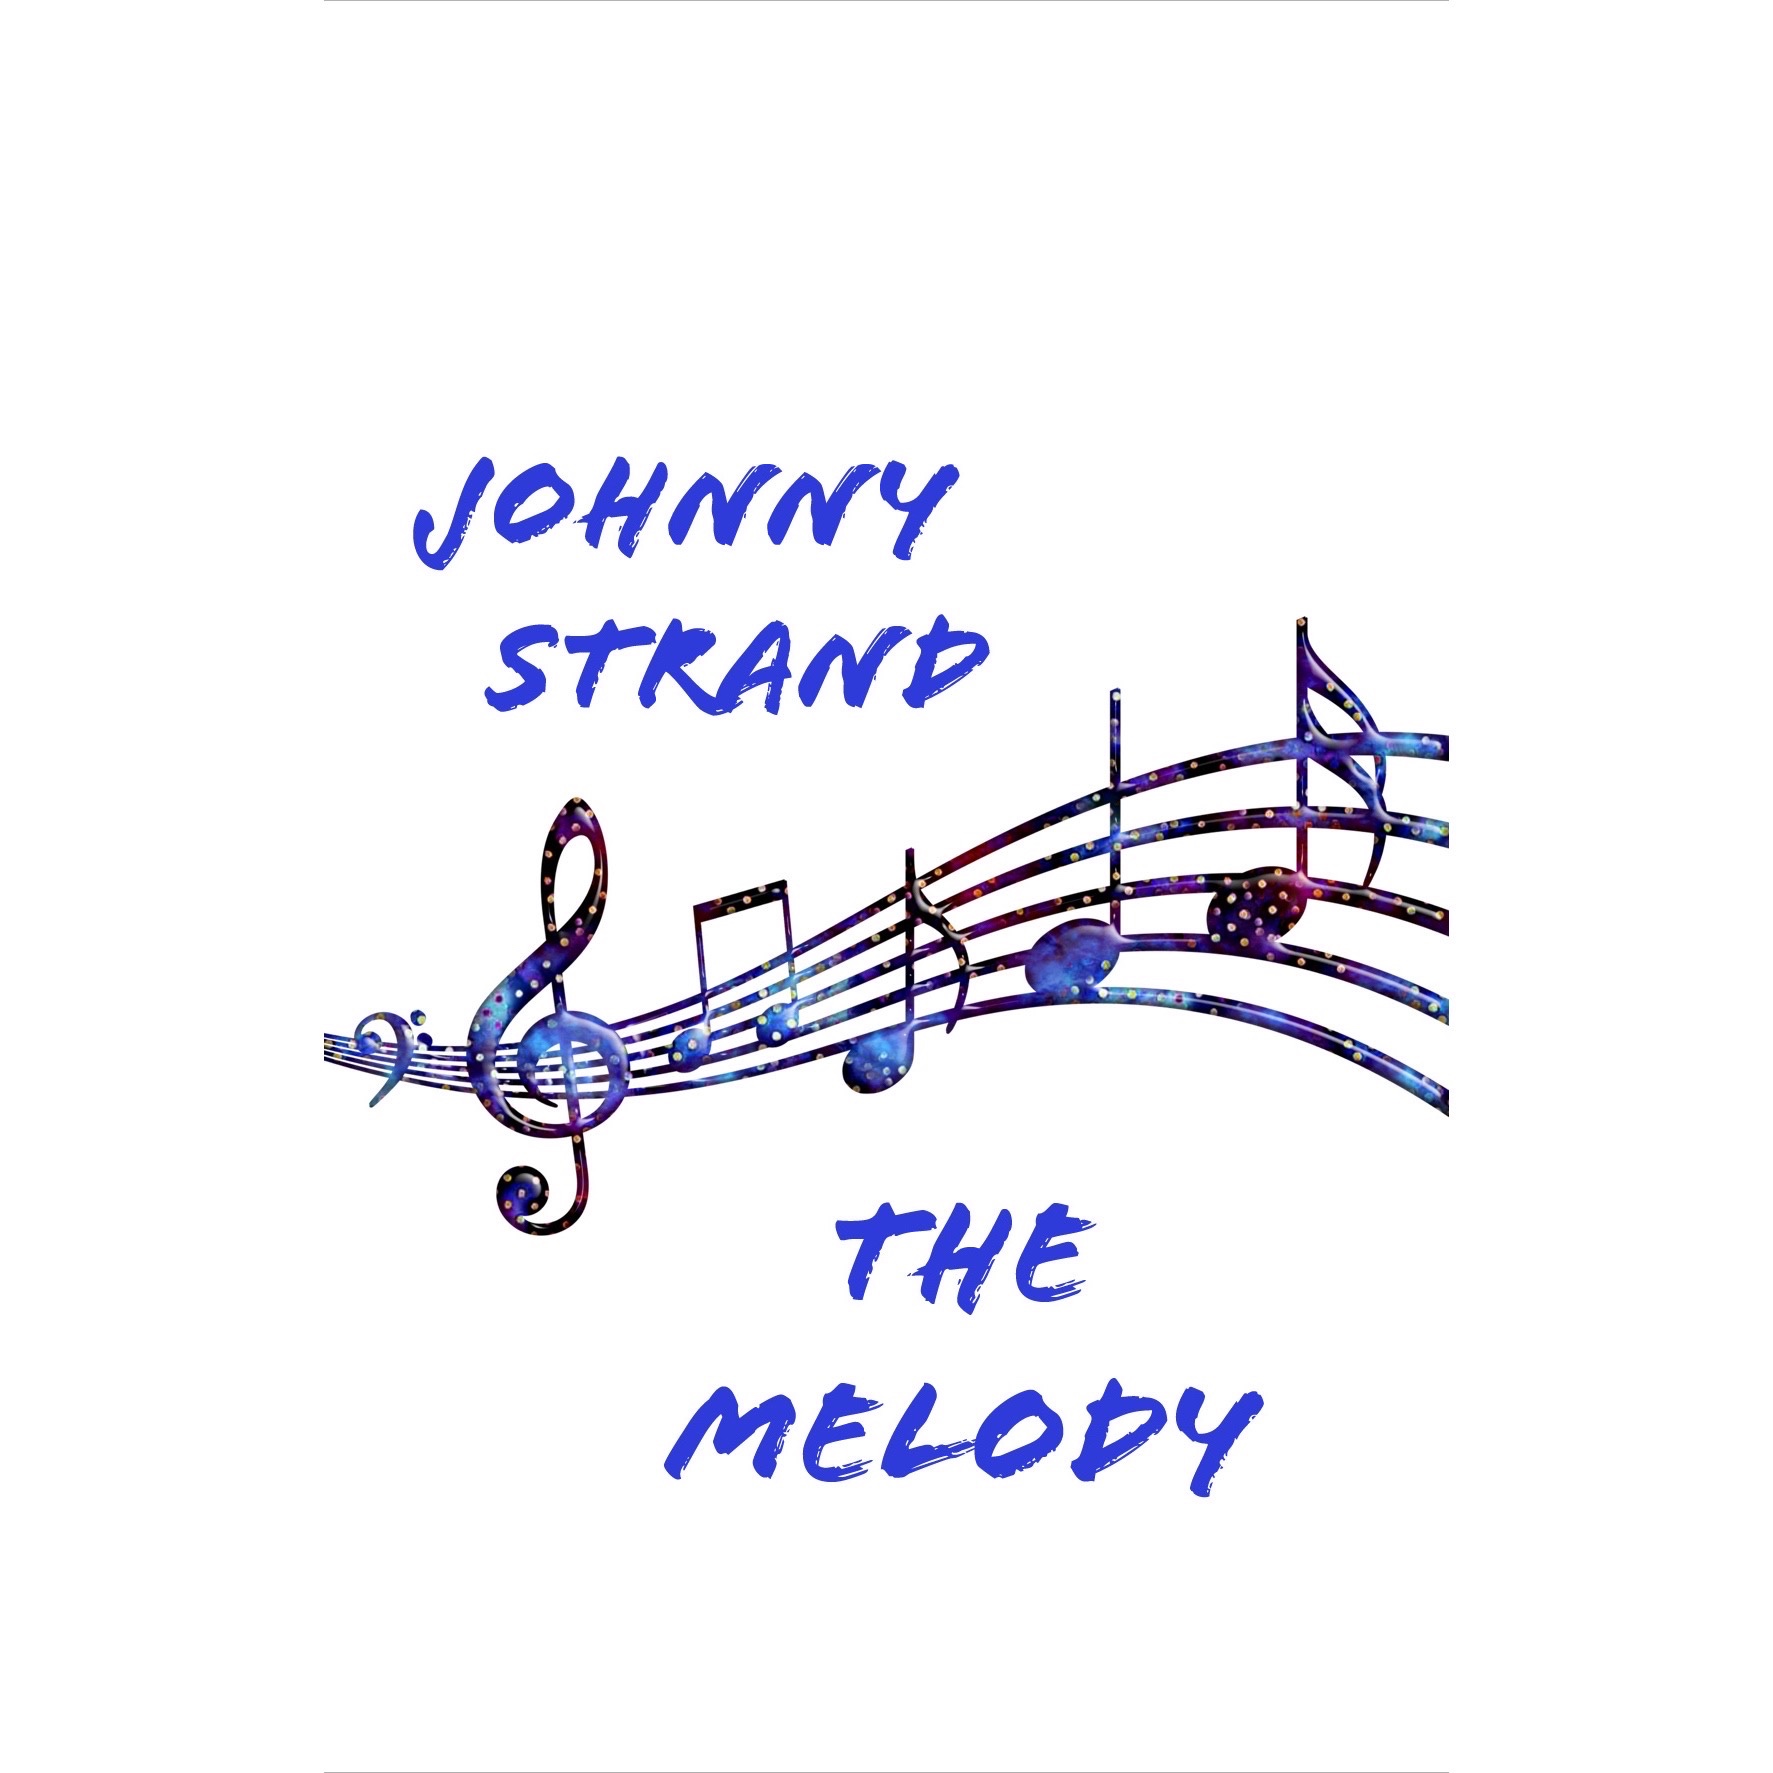 A Melodic Trance of Electronic Rhythms to Lose Oneself To: Johnny Strand Drops Striking Debut Single "The Melody"